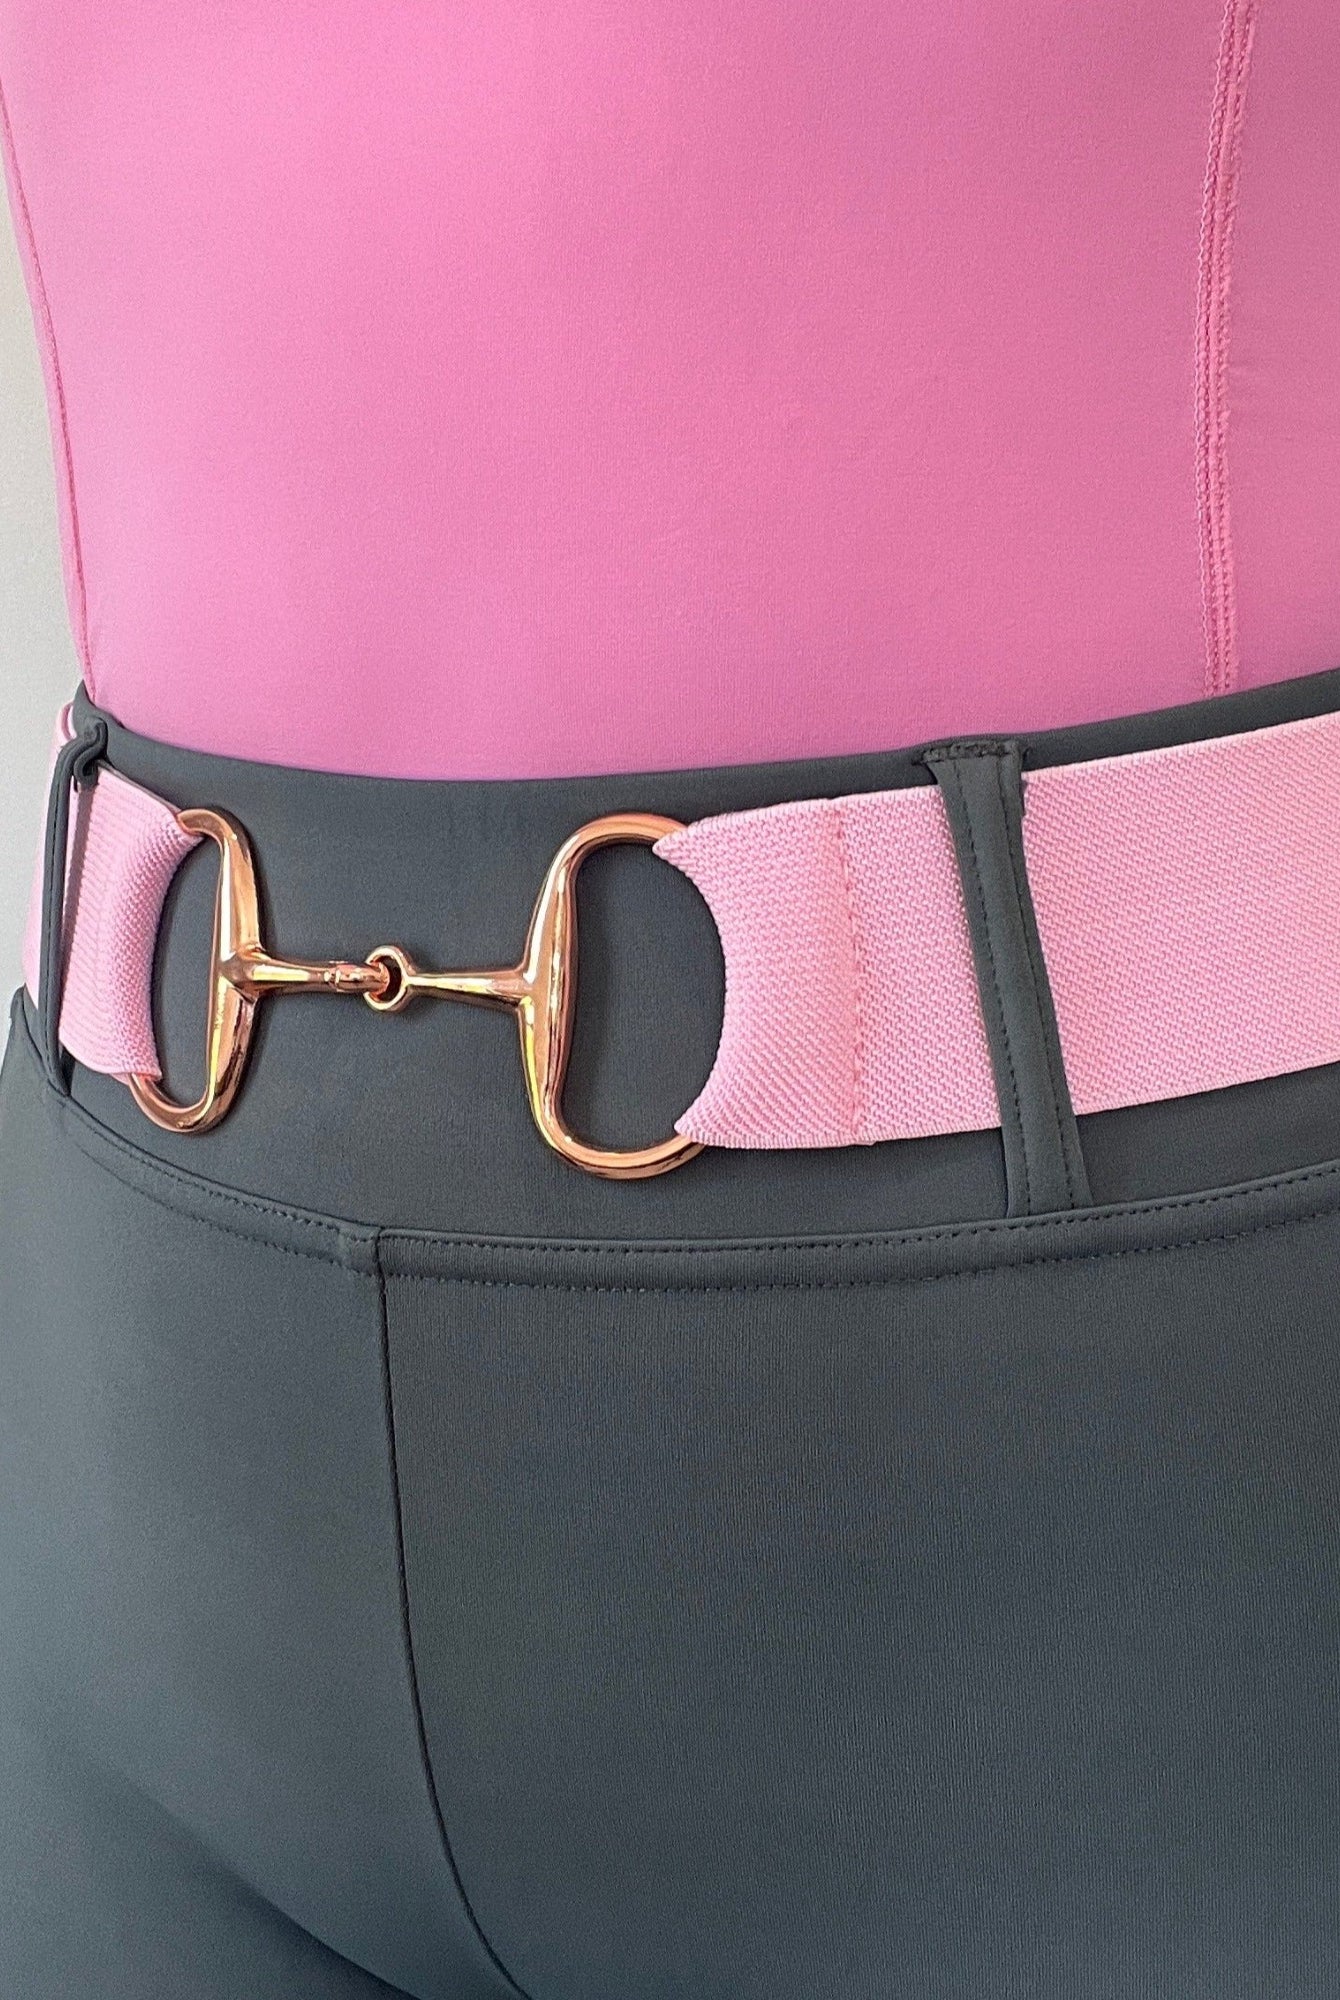 Close-up of a person wearing grey high-waisted pants and a pink shirt. They are accessorized with The Snaffle Belt by Pure Canter, featuring a gold-tone horse bit buckle, ensuring an adjustable fit. The background is plain and light-colored.